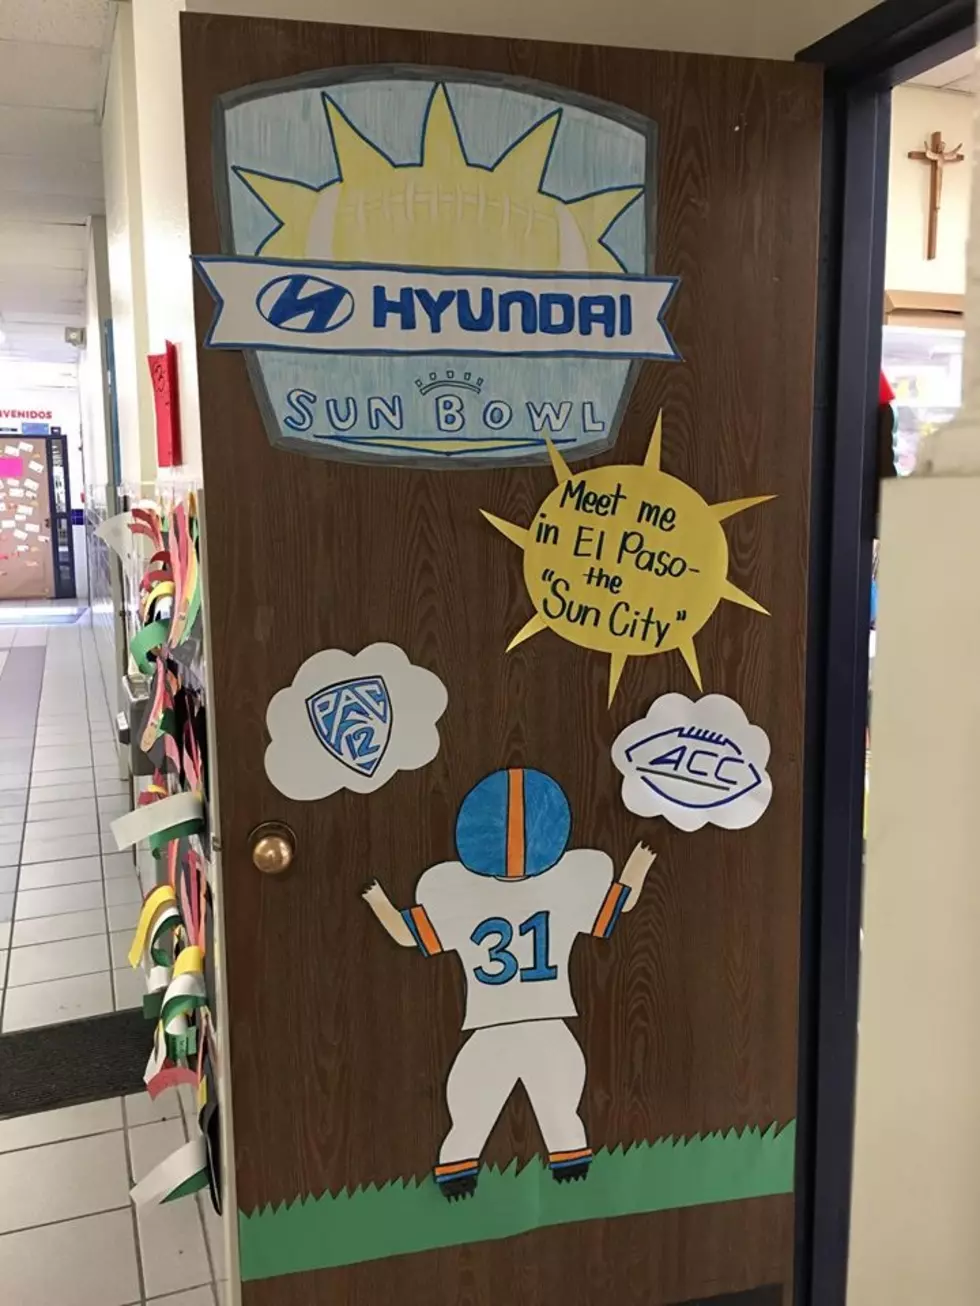 El Paso Elementary School Kids Competing For Free Sun Bowl Tickets &#8211; Vote For The Winning Class